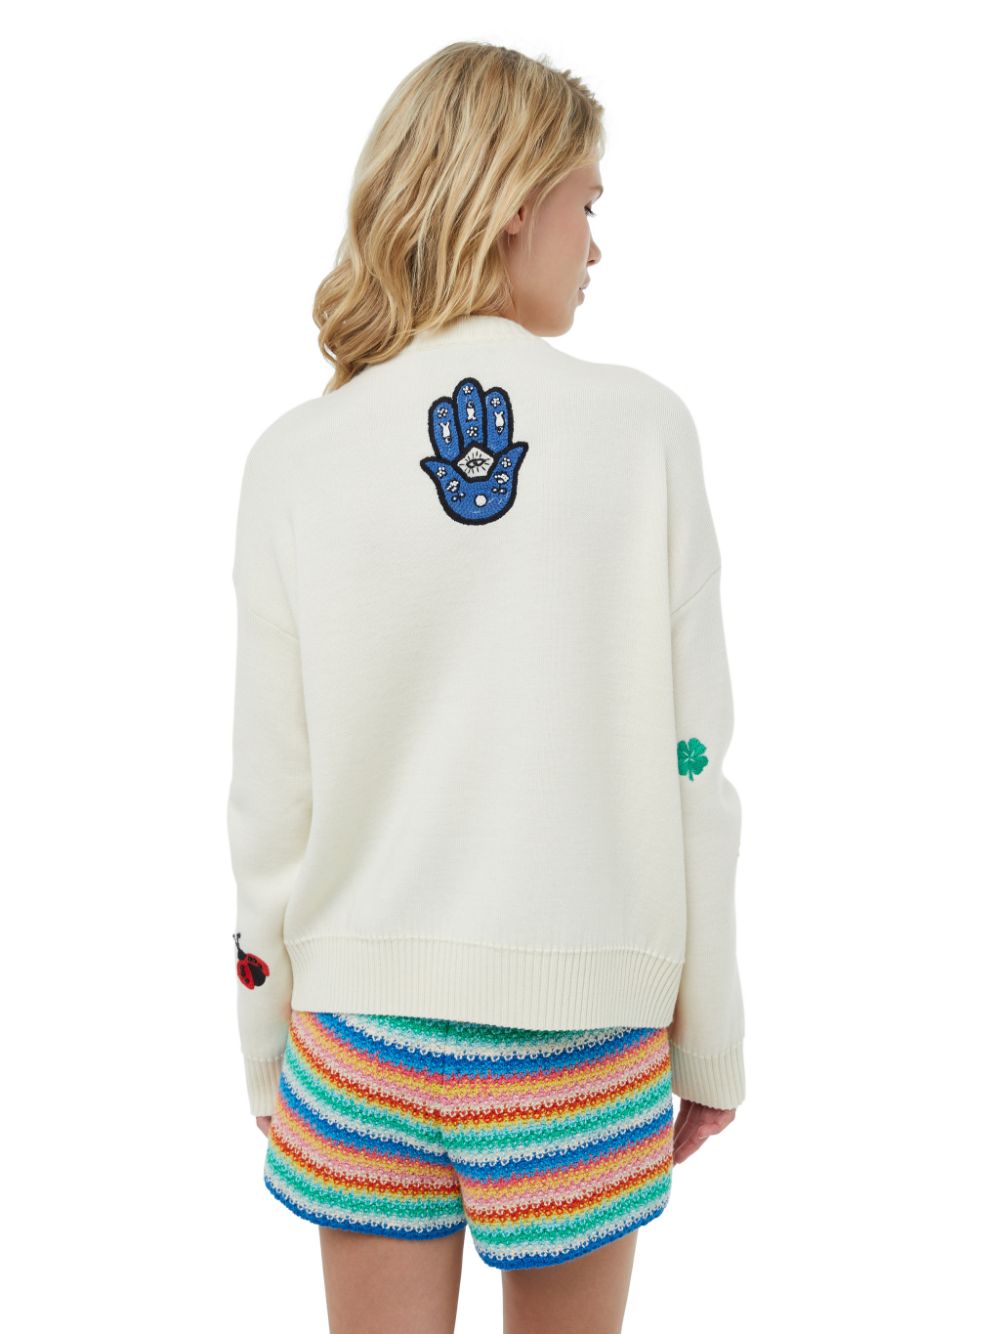 【ALANUI】＜WOMEN'S＞LUCKY CHARM EMBROIDERED SWEATER